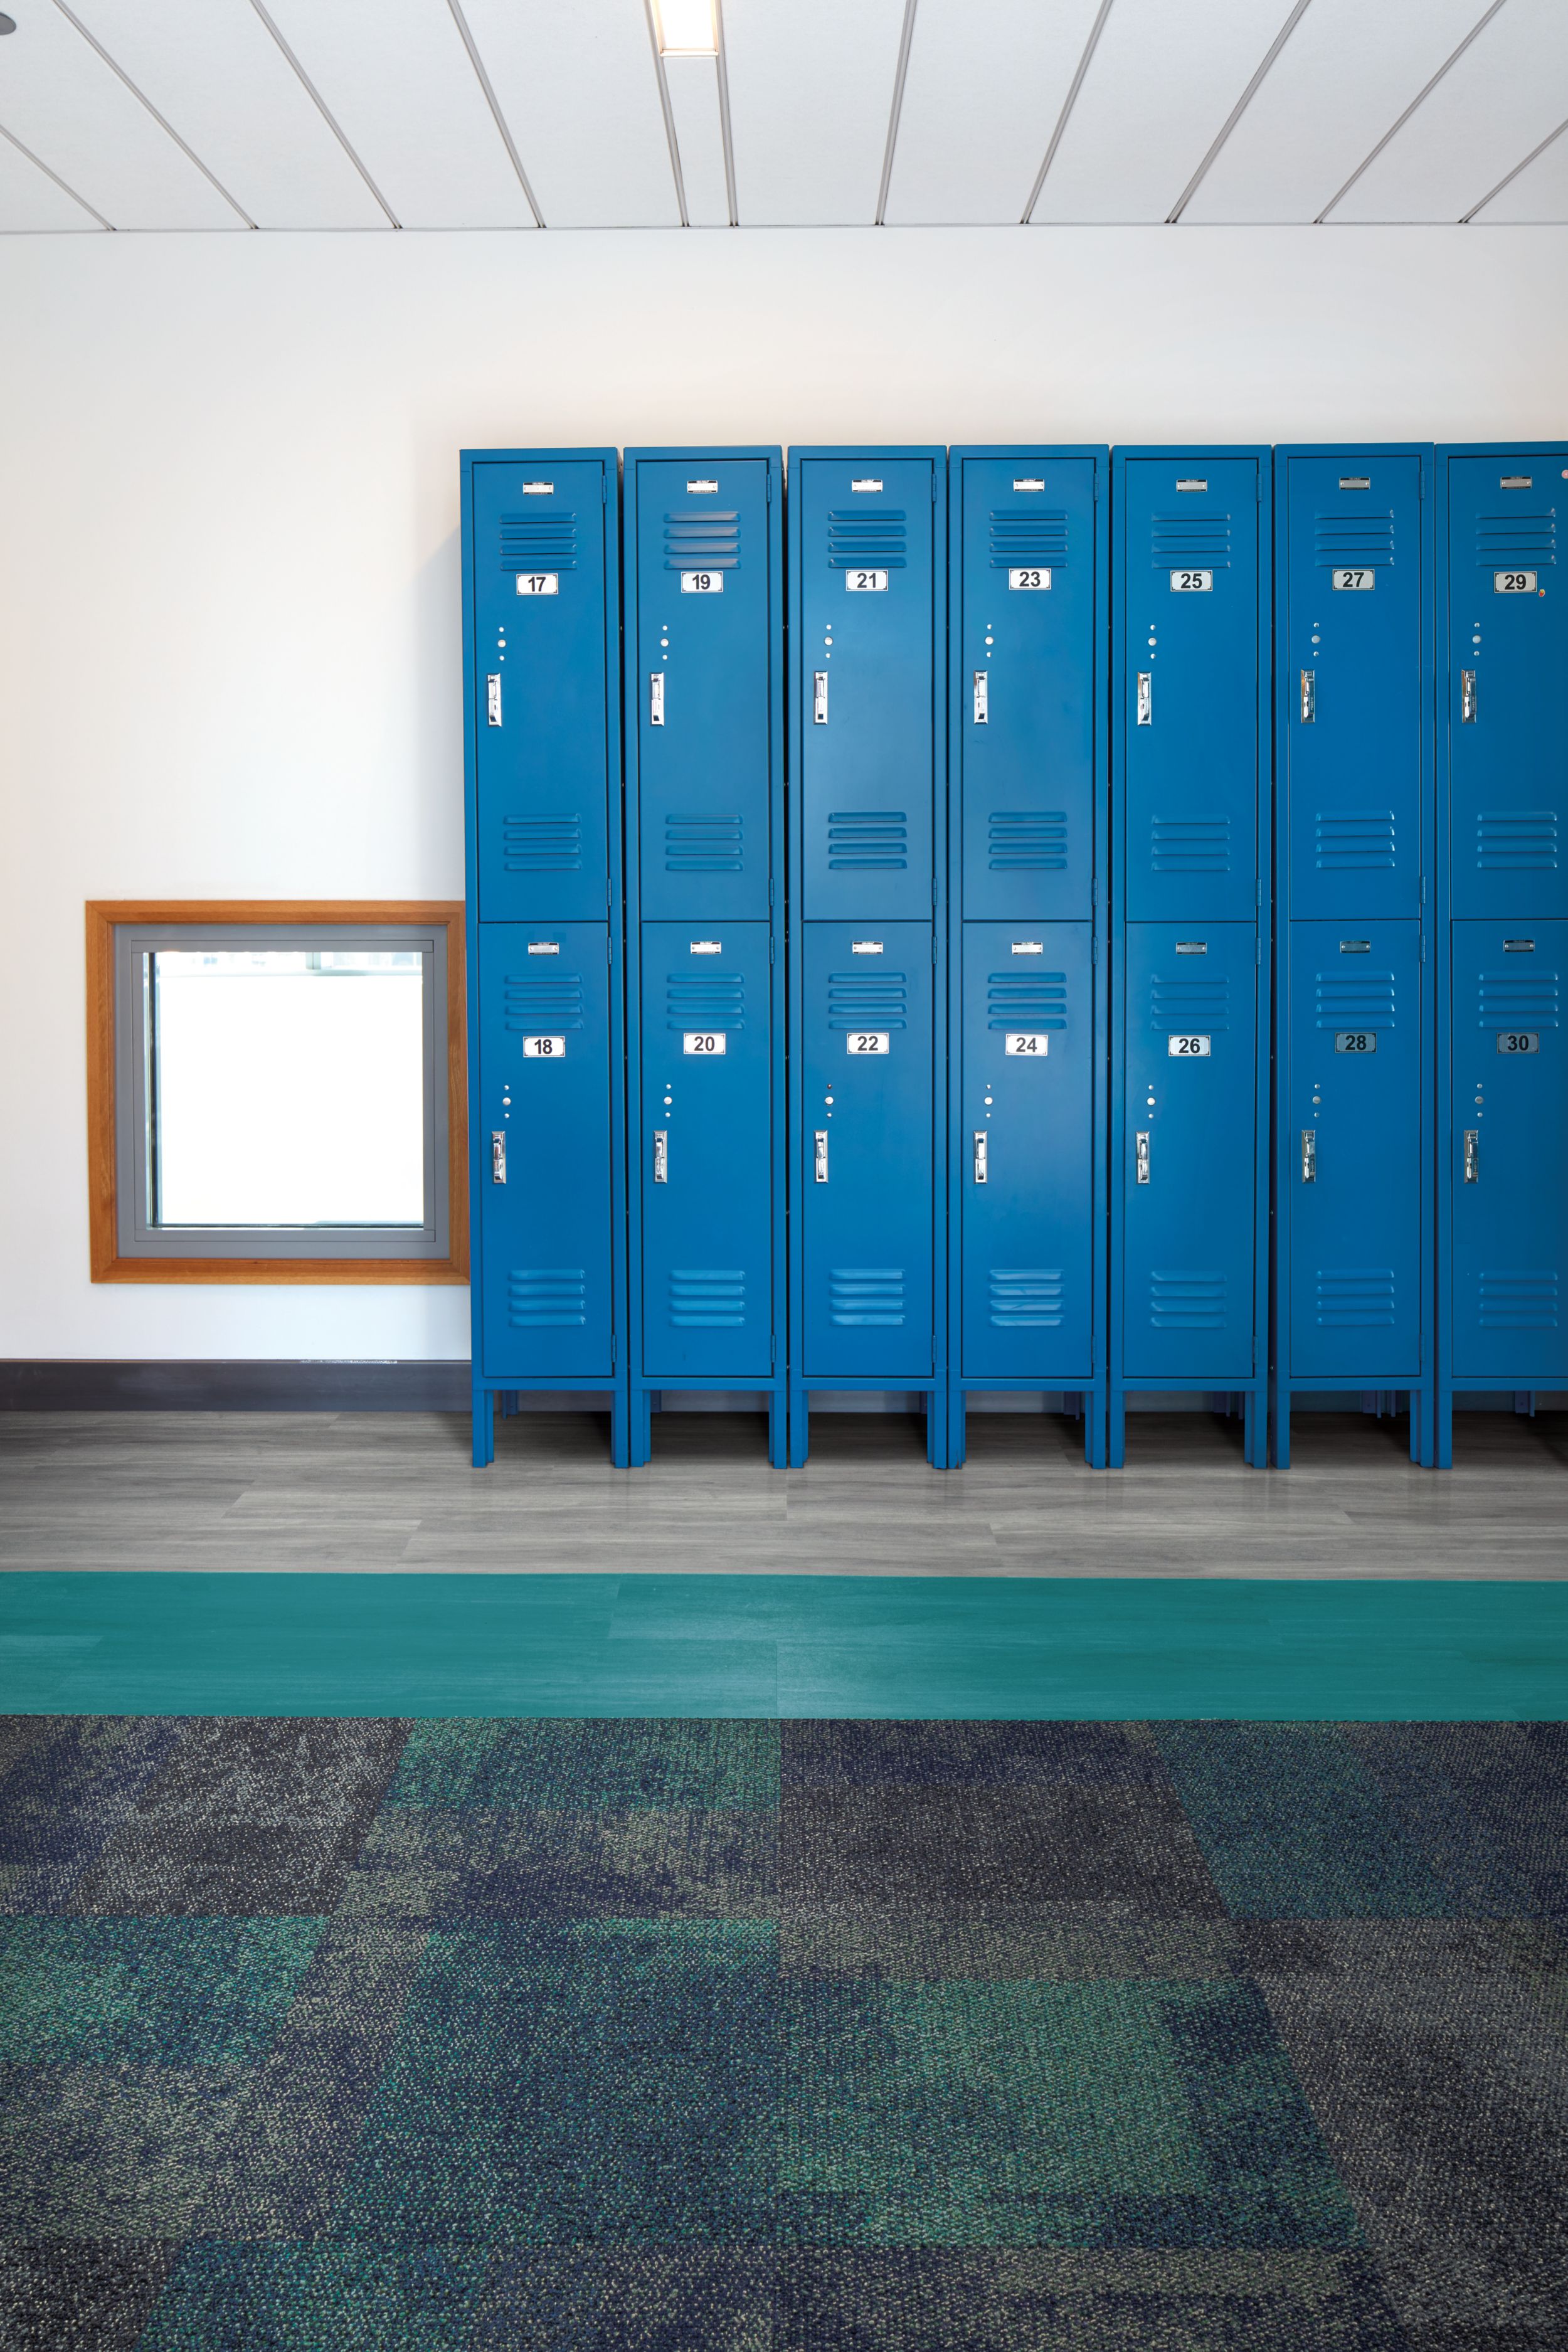 Interface Exposed carpet tile and Studio Set LVT in hallway with blue lockers imagen número 11